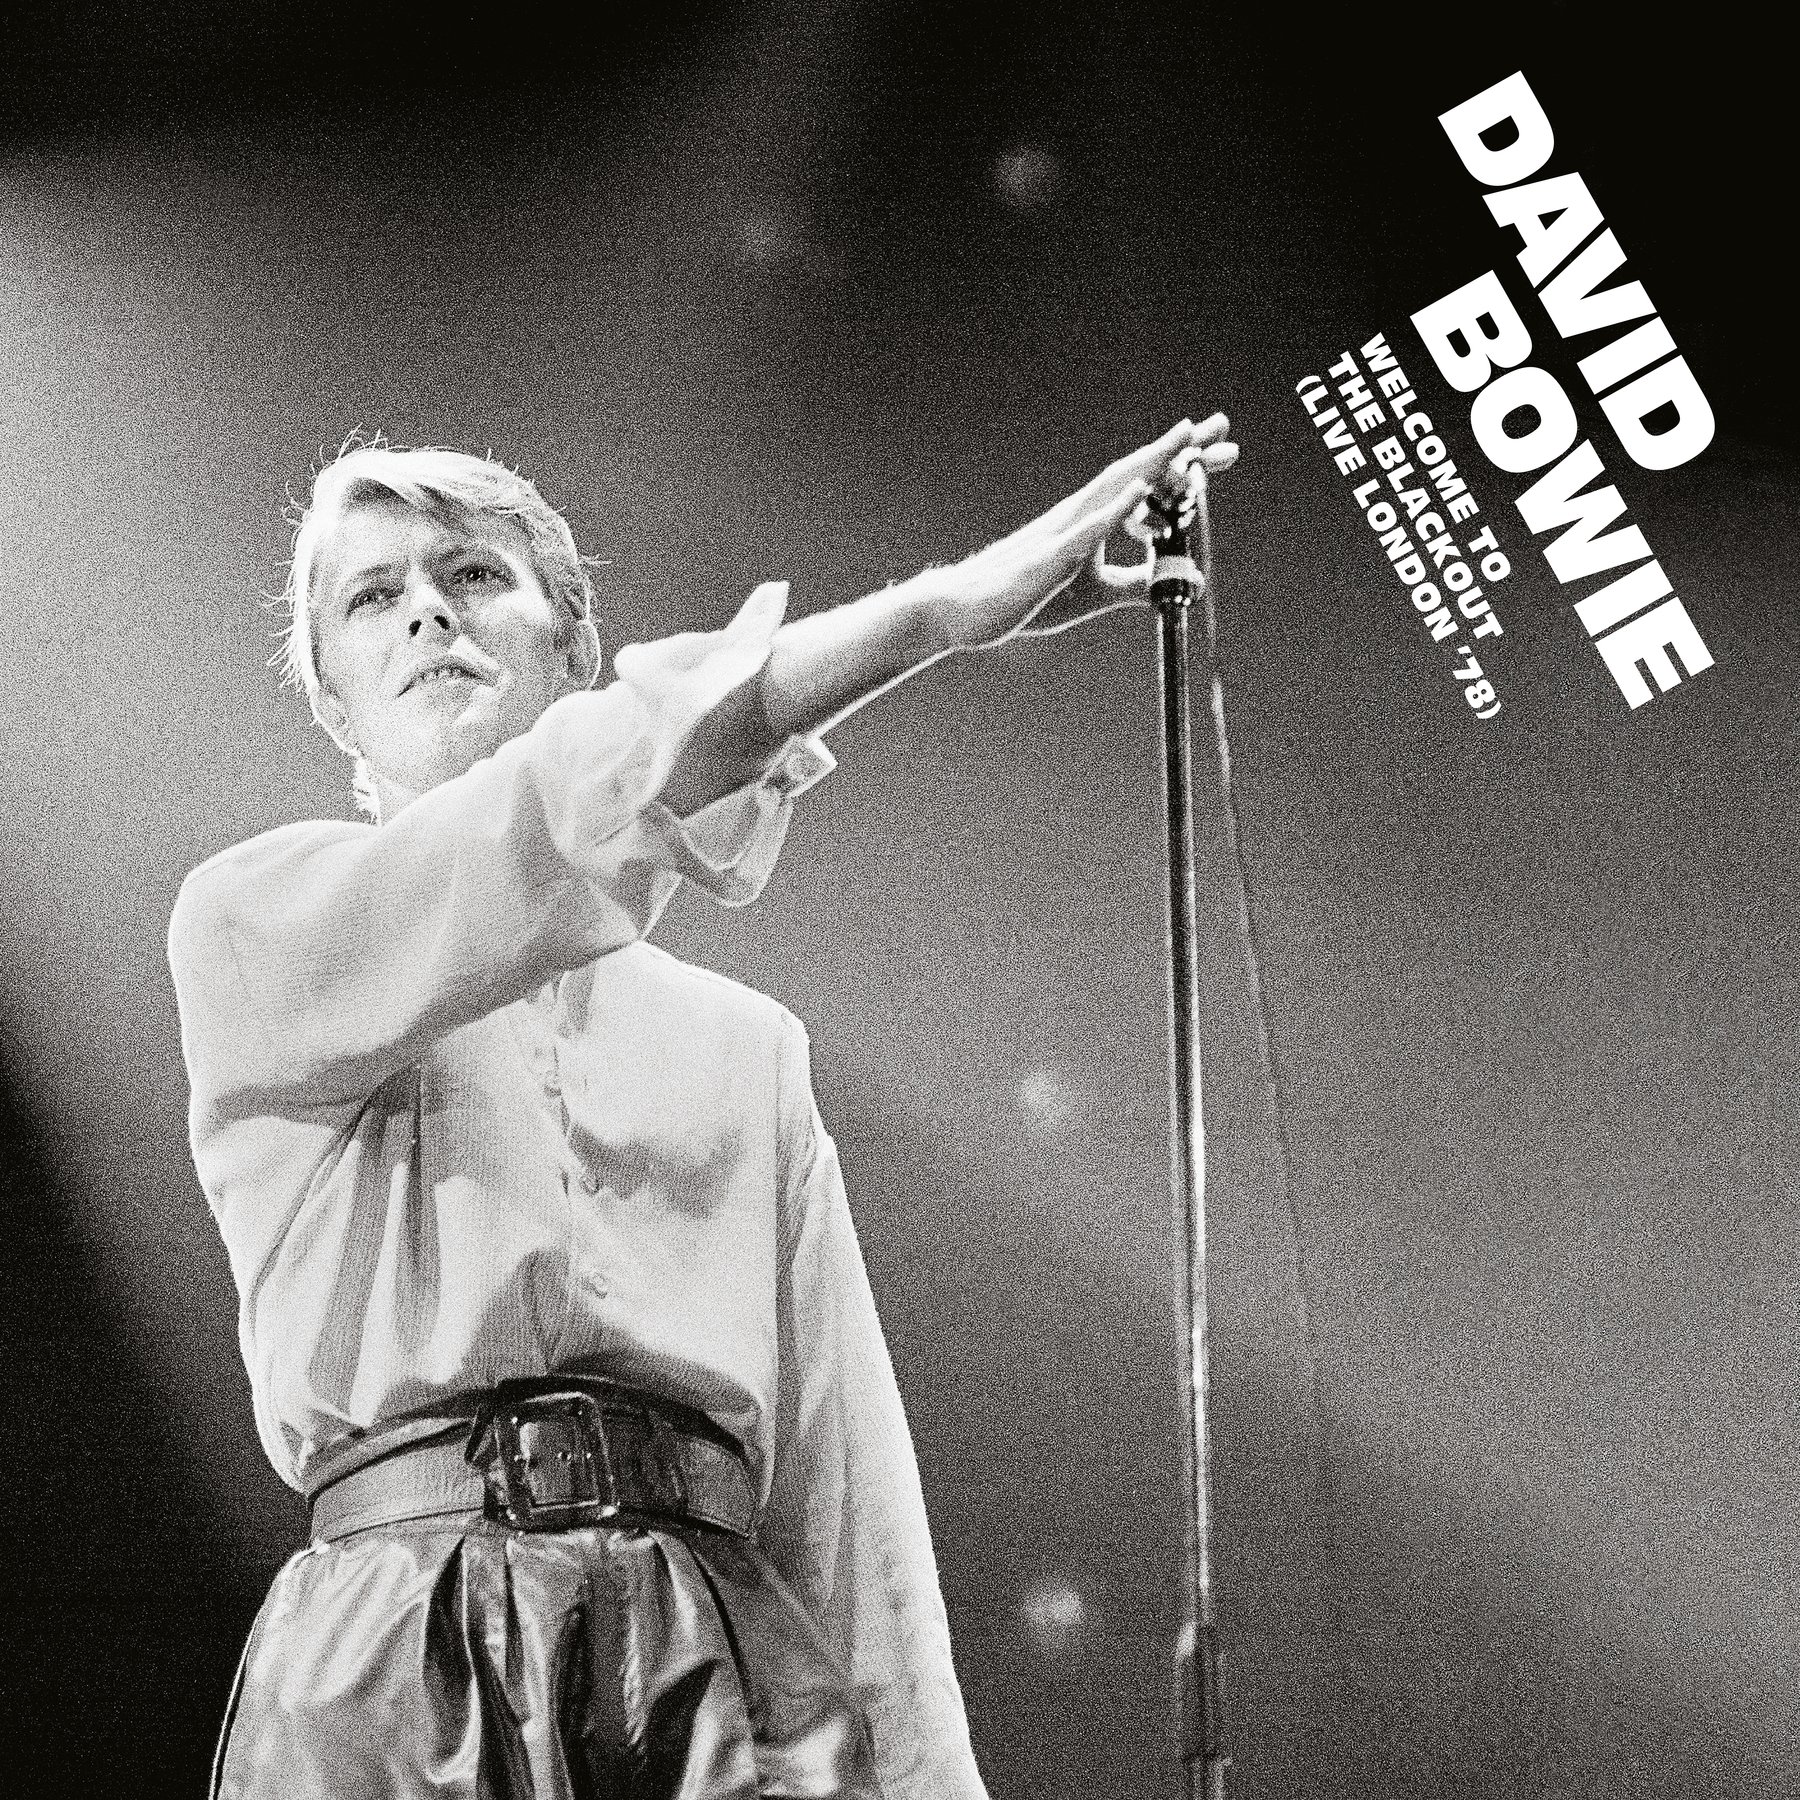 DAVID BOWIE | 'Welcome To The Blackout (Live in London '78)' 3xLP